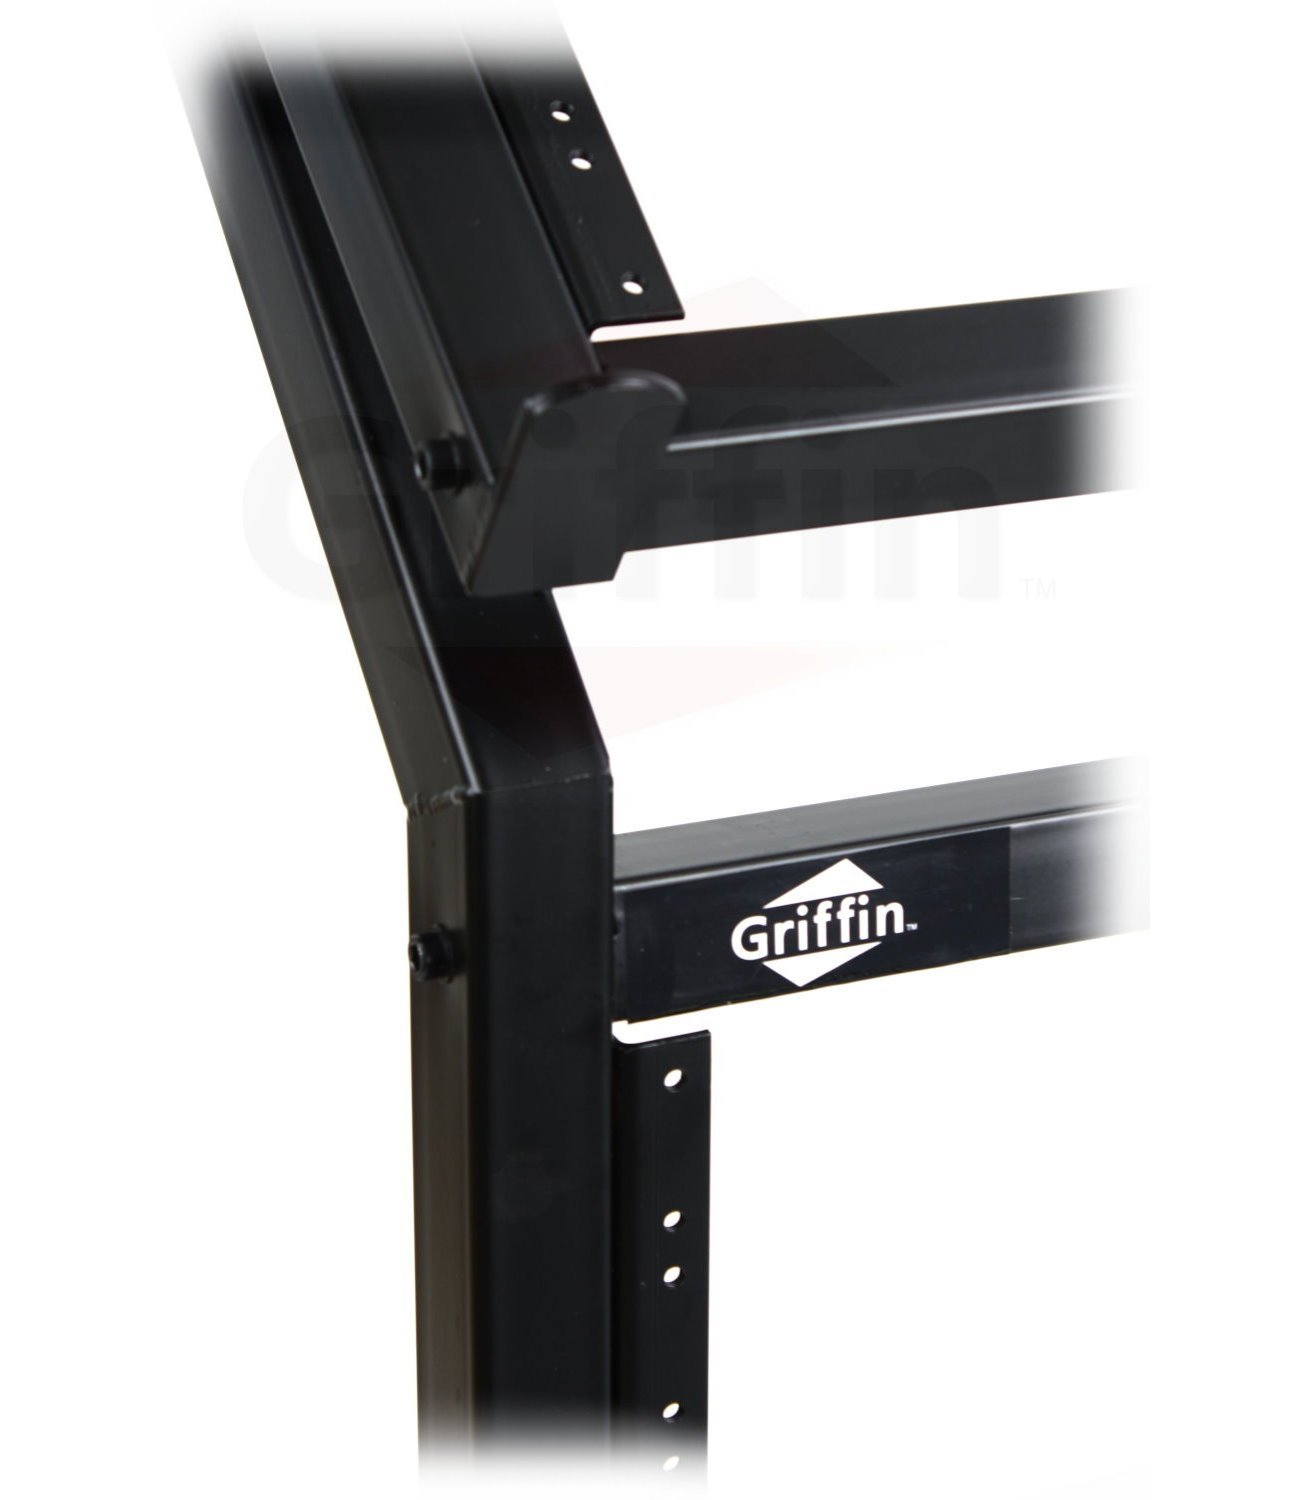 https://griffin-stands.com/wp-content/uploads/imported/Rack-Mount-Rolling-Stand-and-Adjustable-Top-Mixer-Platform-Mount-19U-by-GriffinCart-Holder-for-Music-Studio-Pro-Audio-R-B004THBOPK-4.jpg